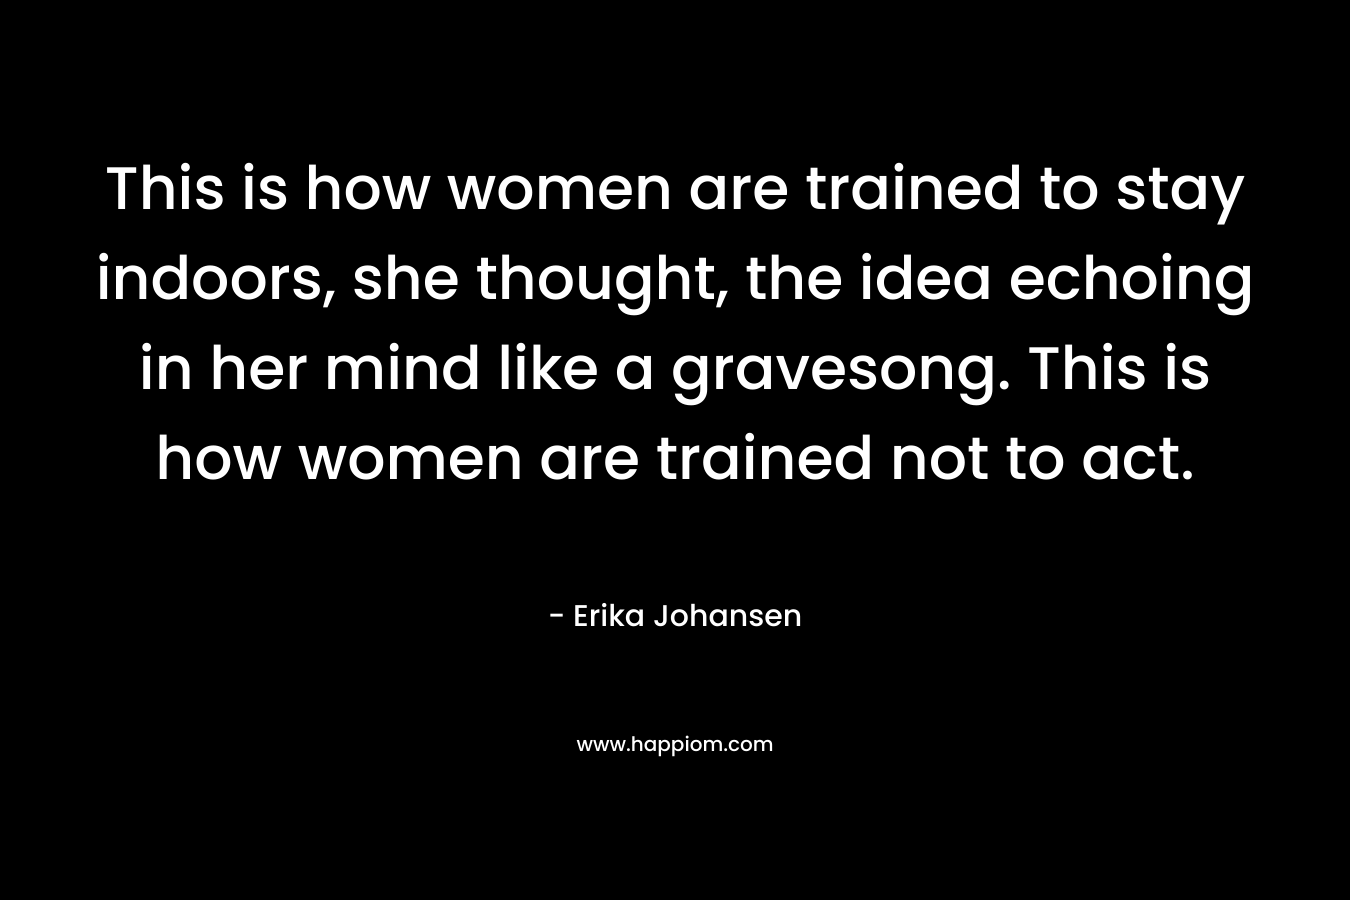 This is how women are trained to stay indoors, she thought, the idea echoing in her mind like a gravesong. This is how women are trained not to act. – Erika Johansen